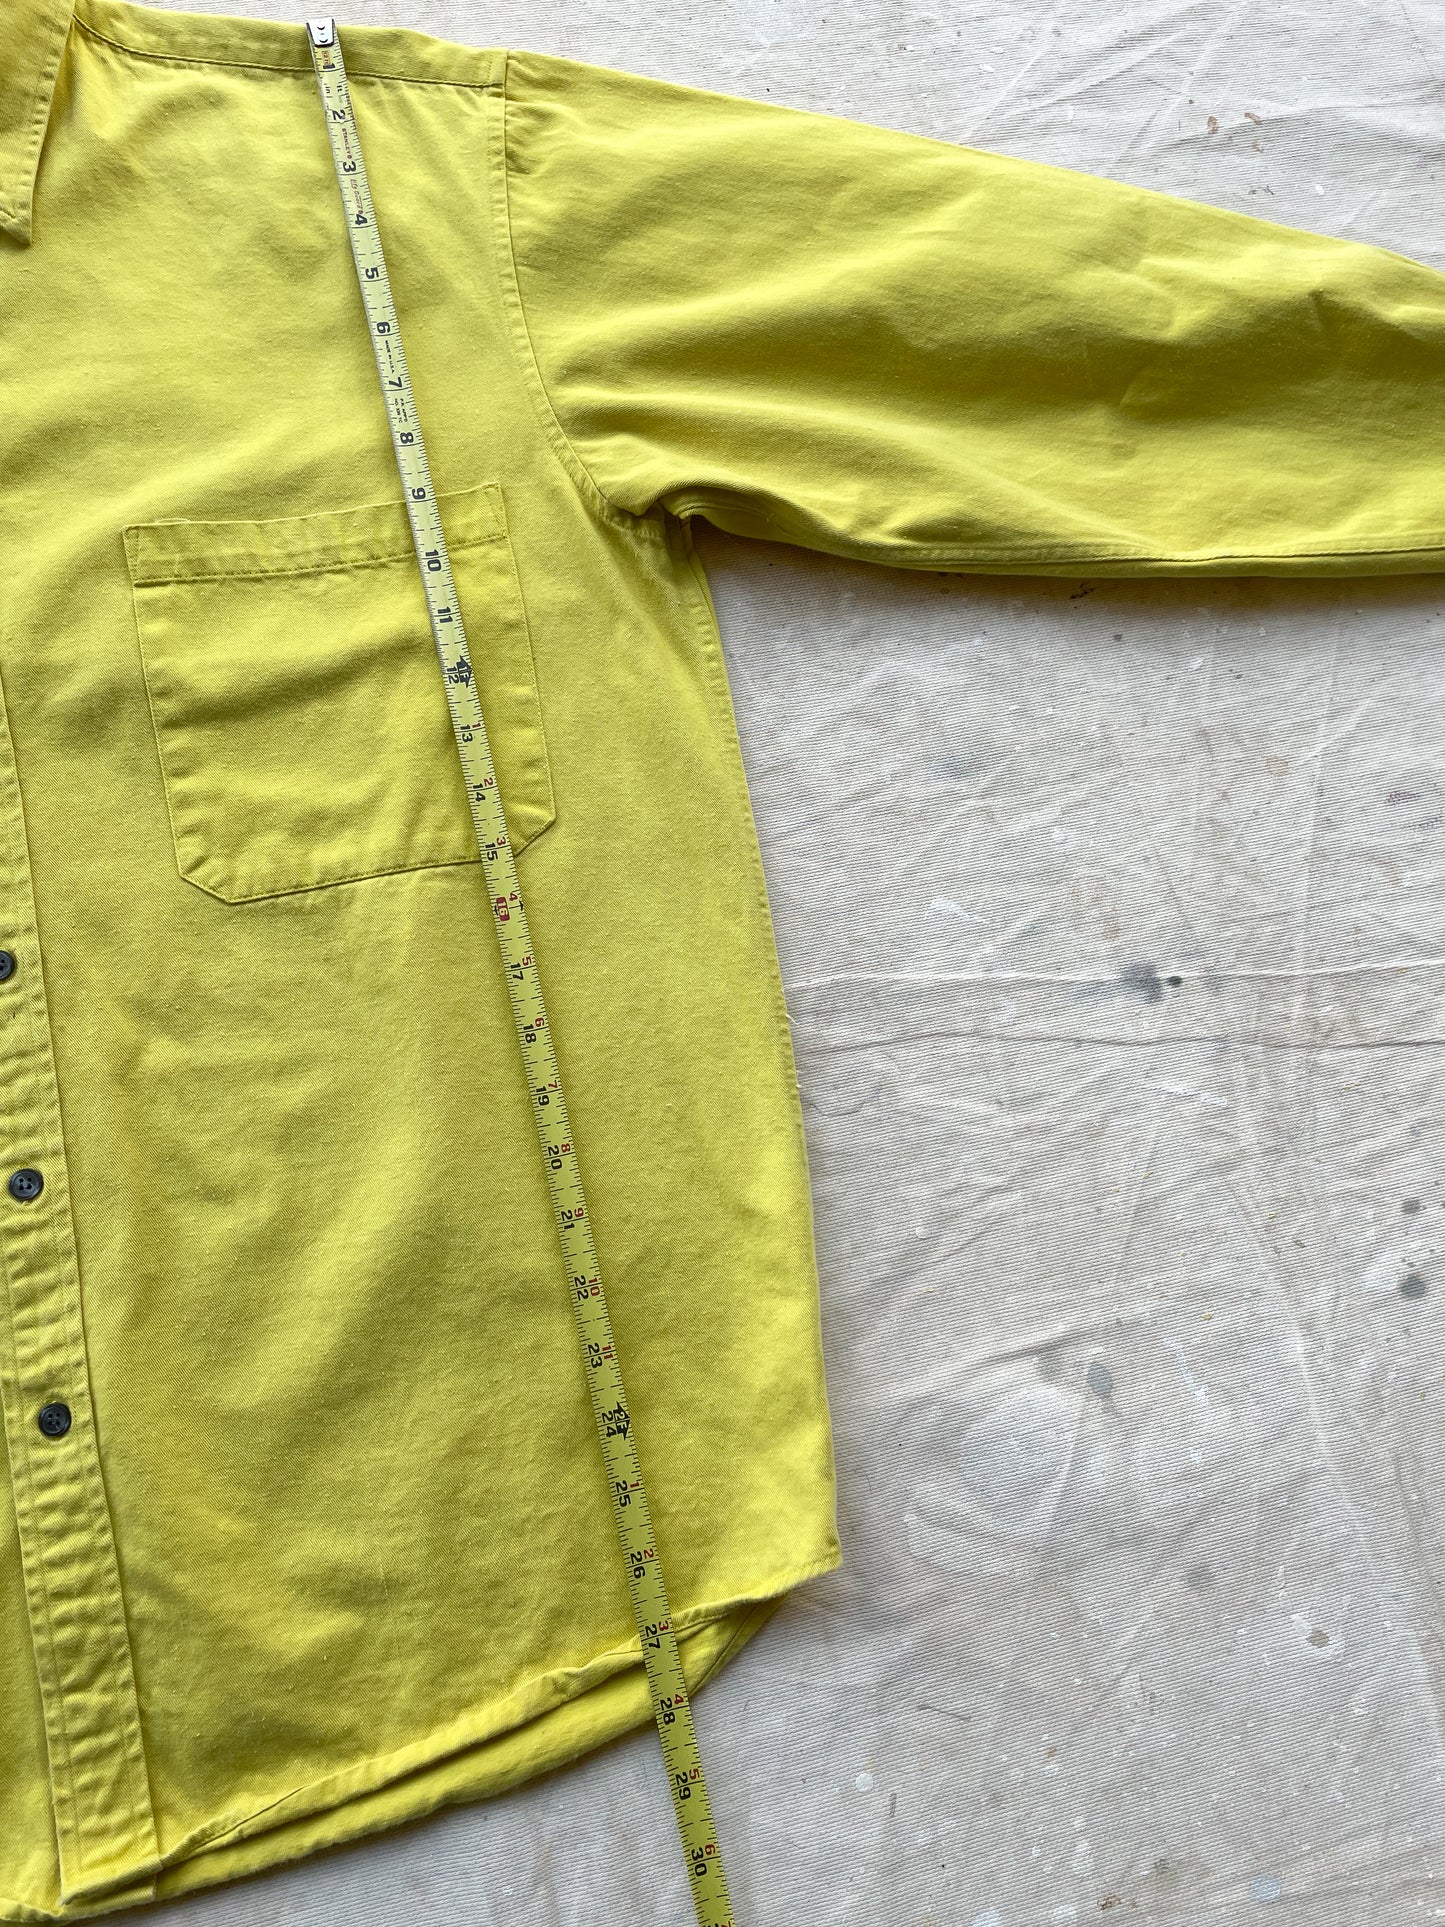 PAUL SMITH BUTTON UP SHIRT—YELLOW [L]